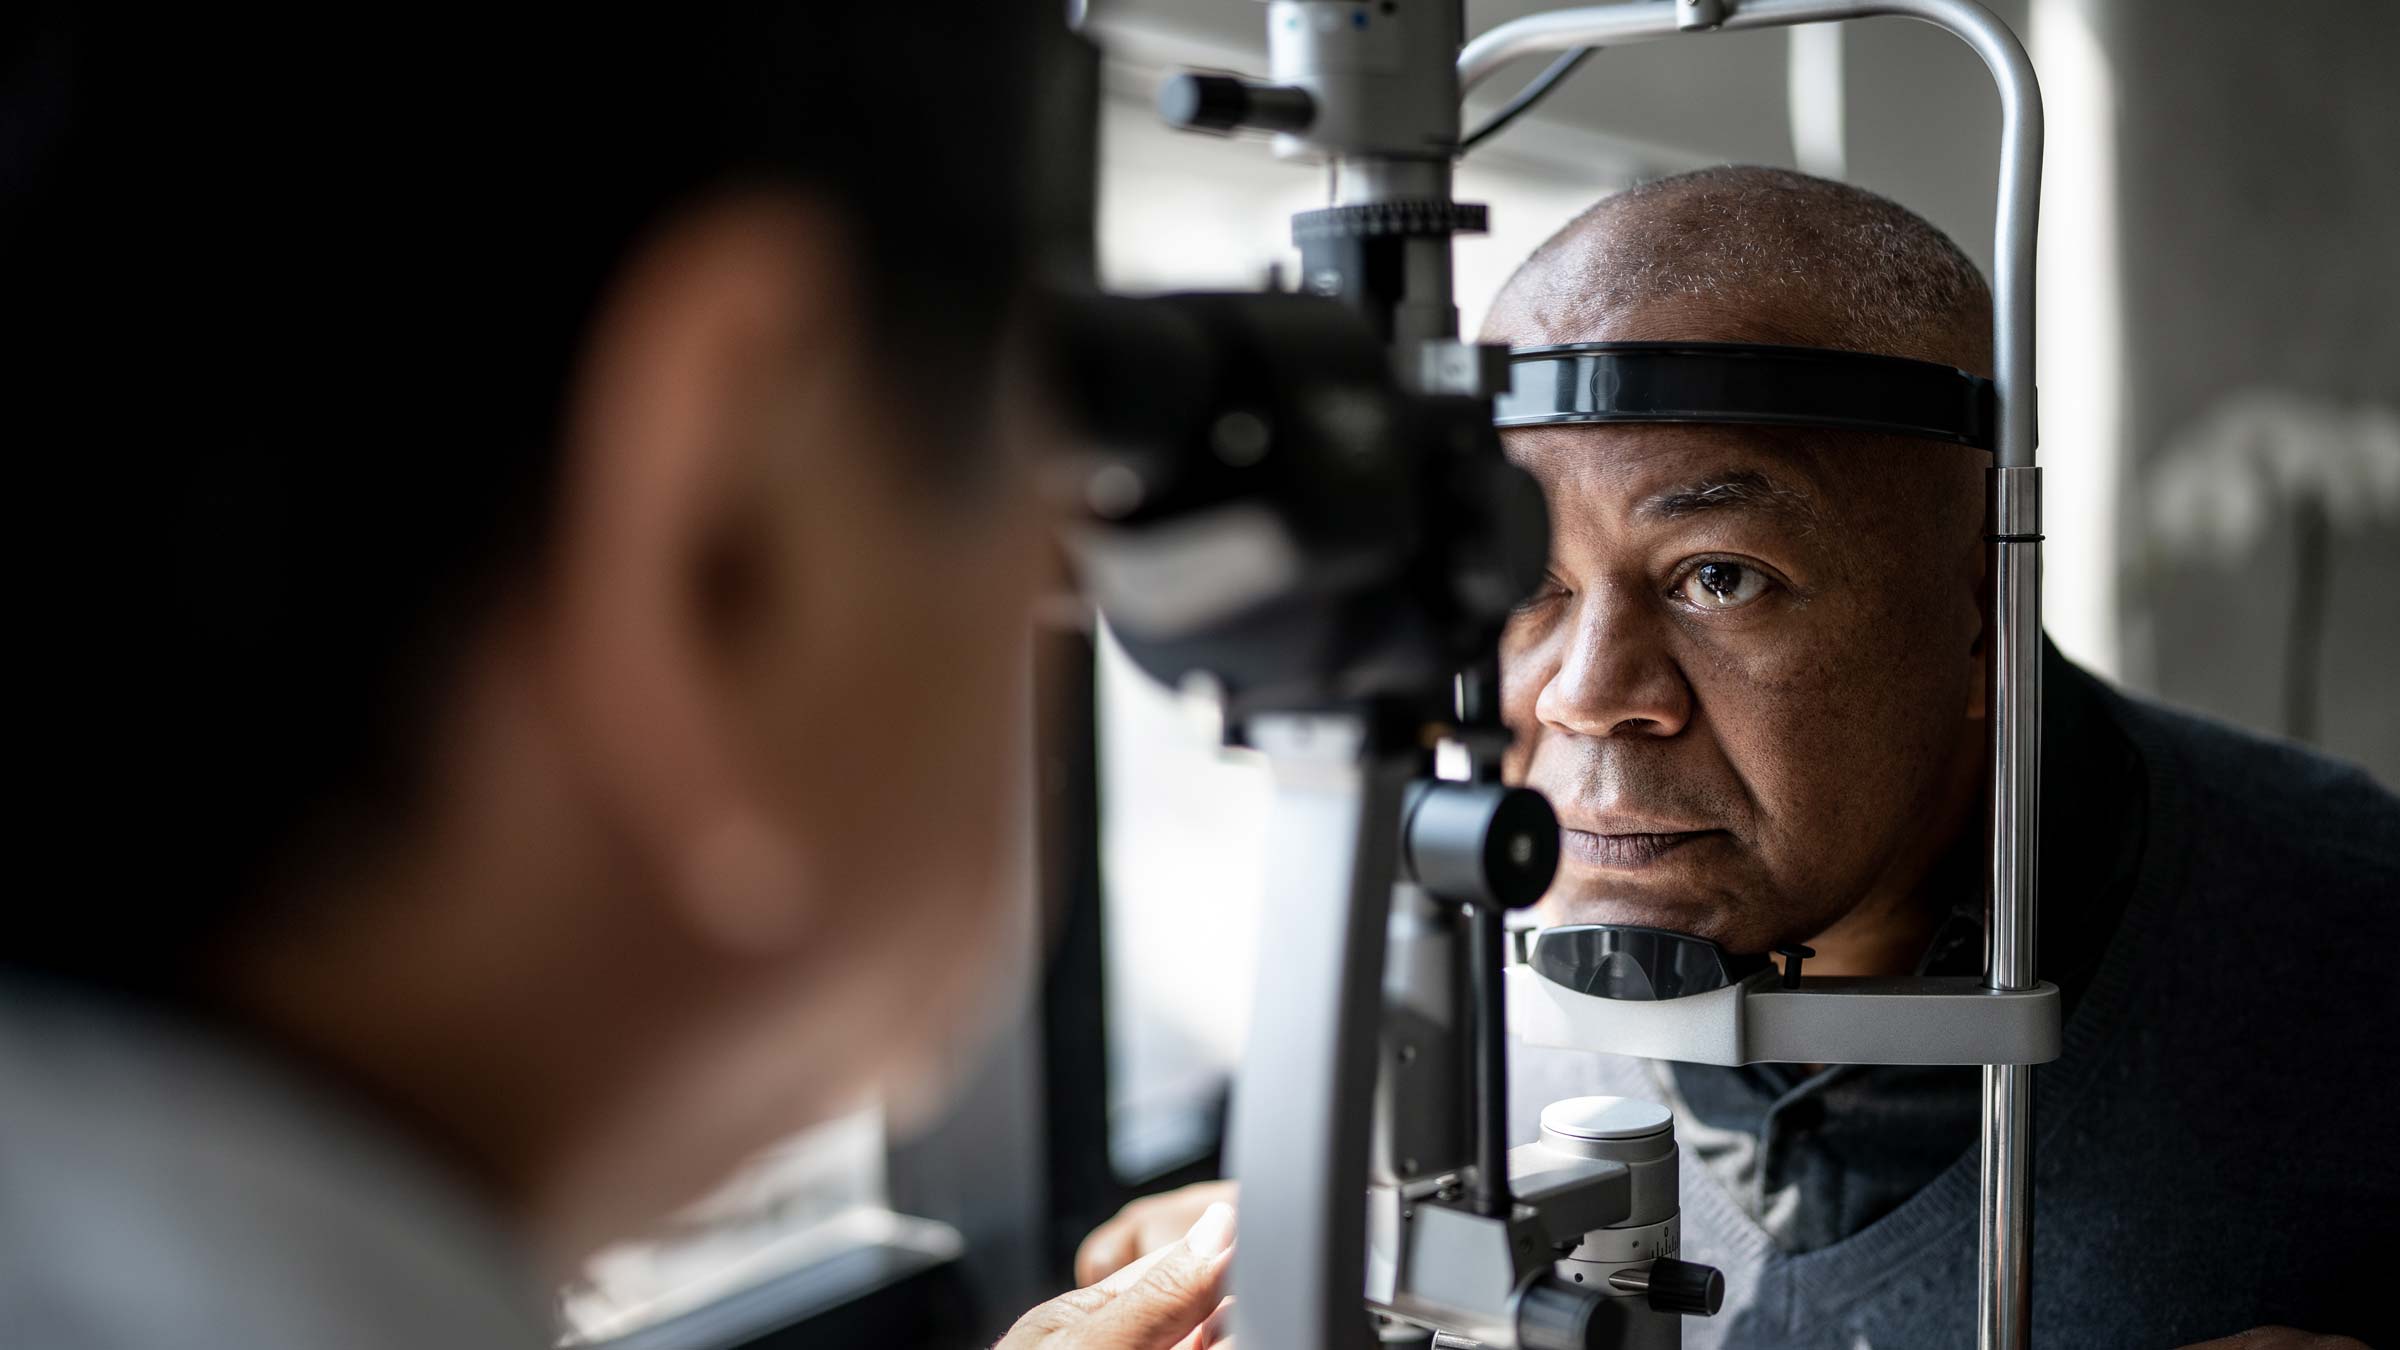 Learn about glaucoma risk factors, causes and frequently asked questions